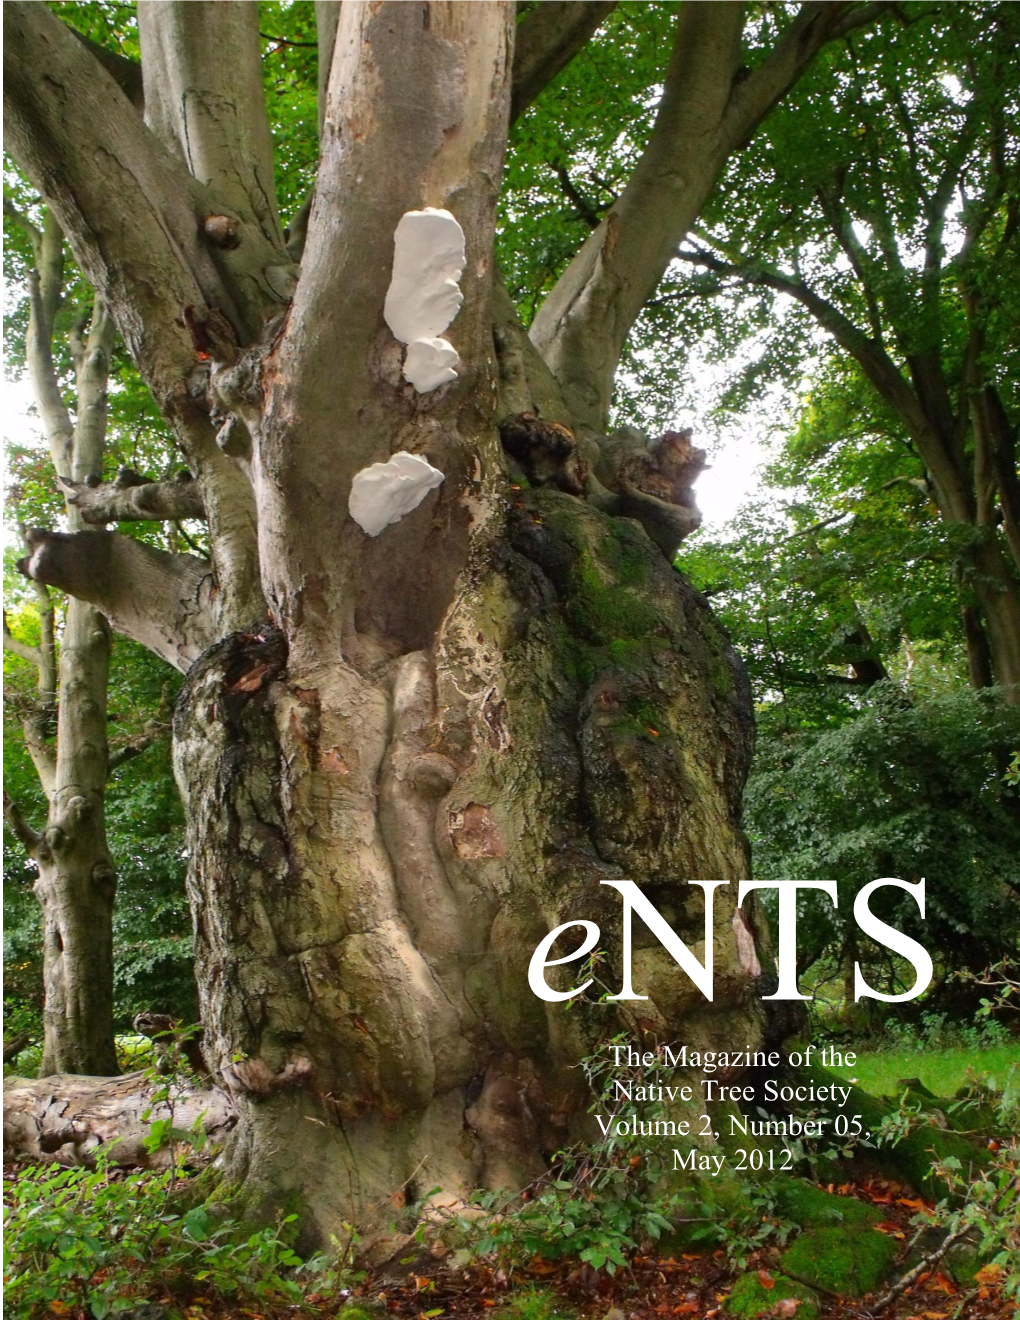 The Magazine of the Native Tree Society Volume 2, Number 05, May 2012